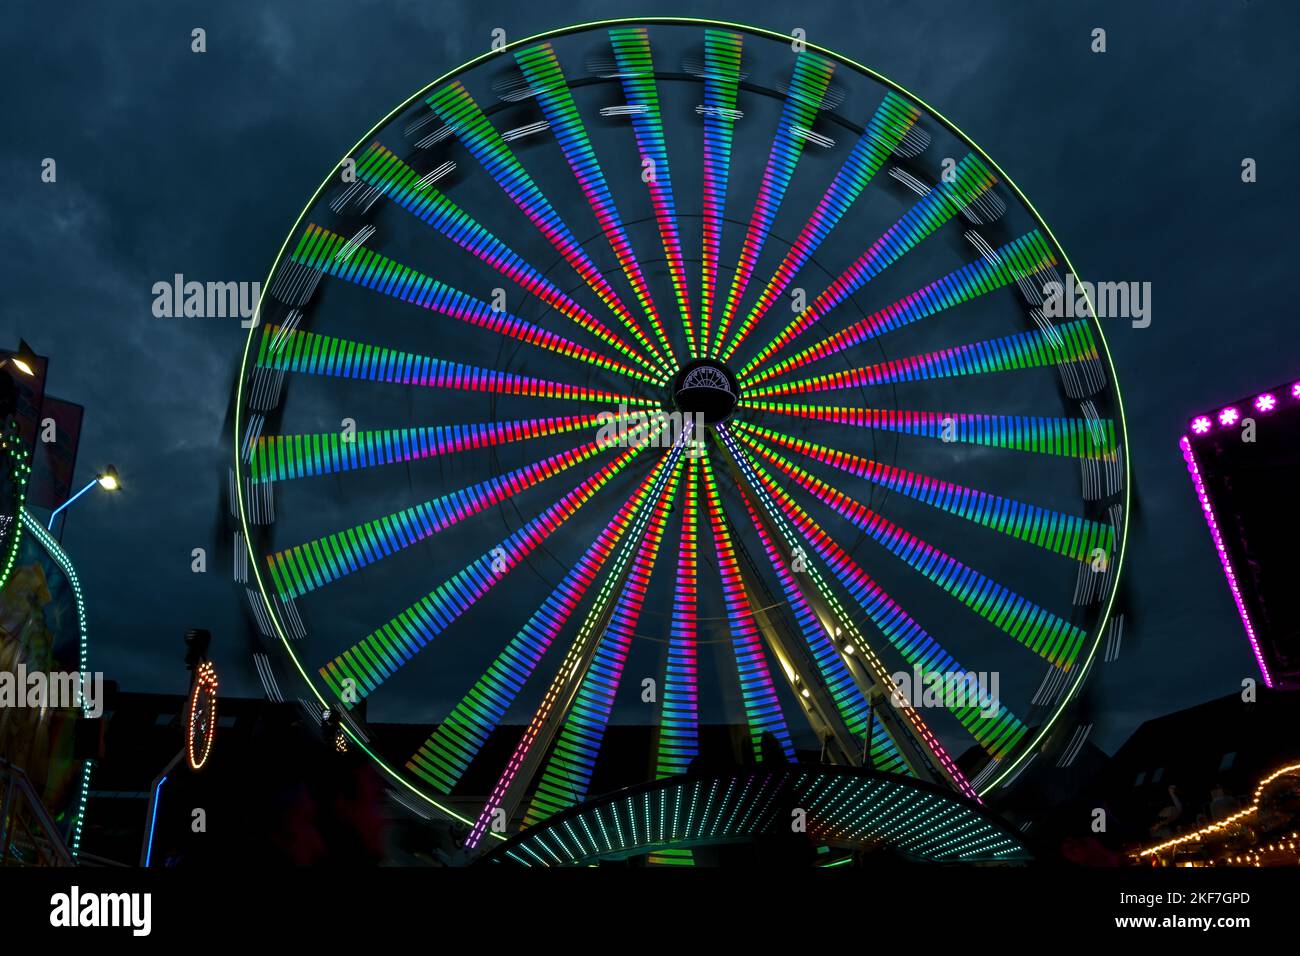 Long exposure of a giant wheel in motion with colorful lights at a christmas fair against a cloudy night sky, abstract image, motion blur Stock Photo